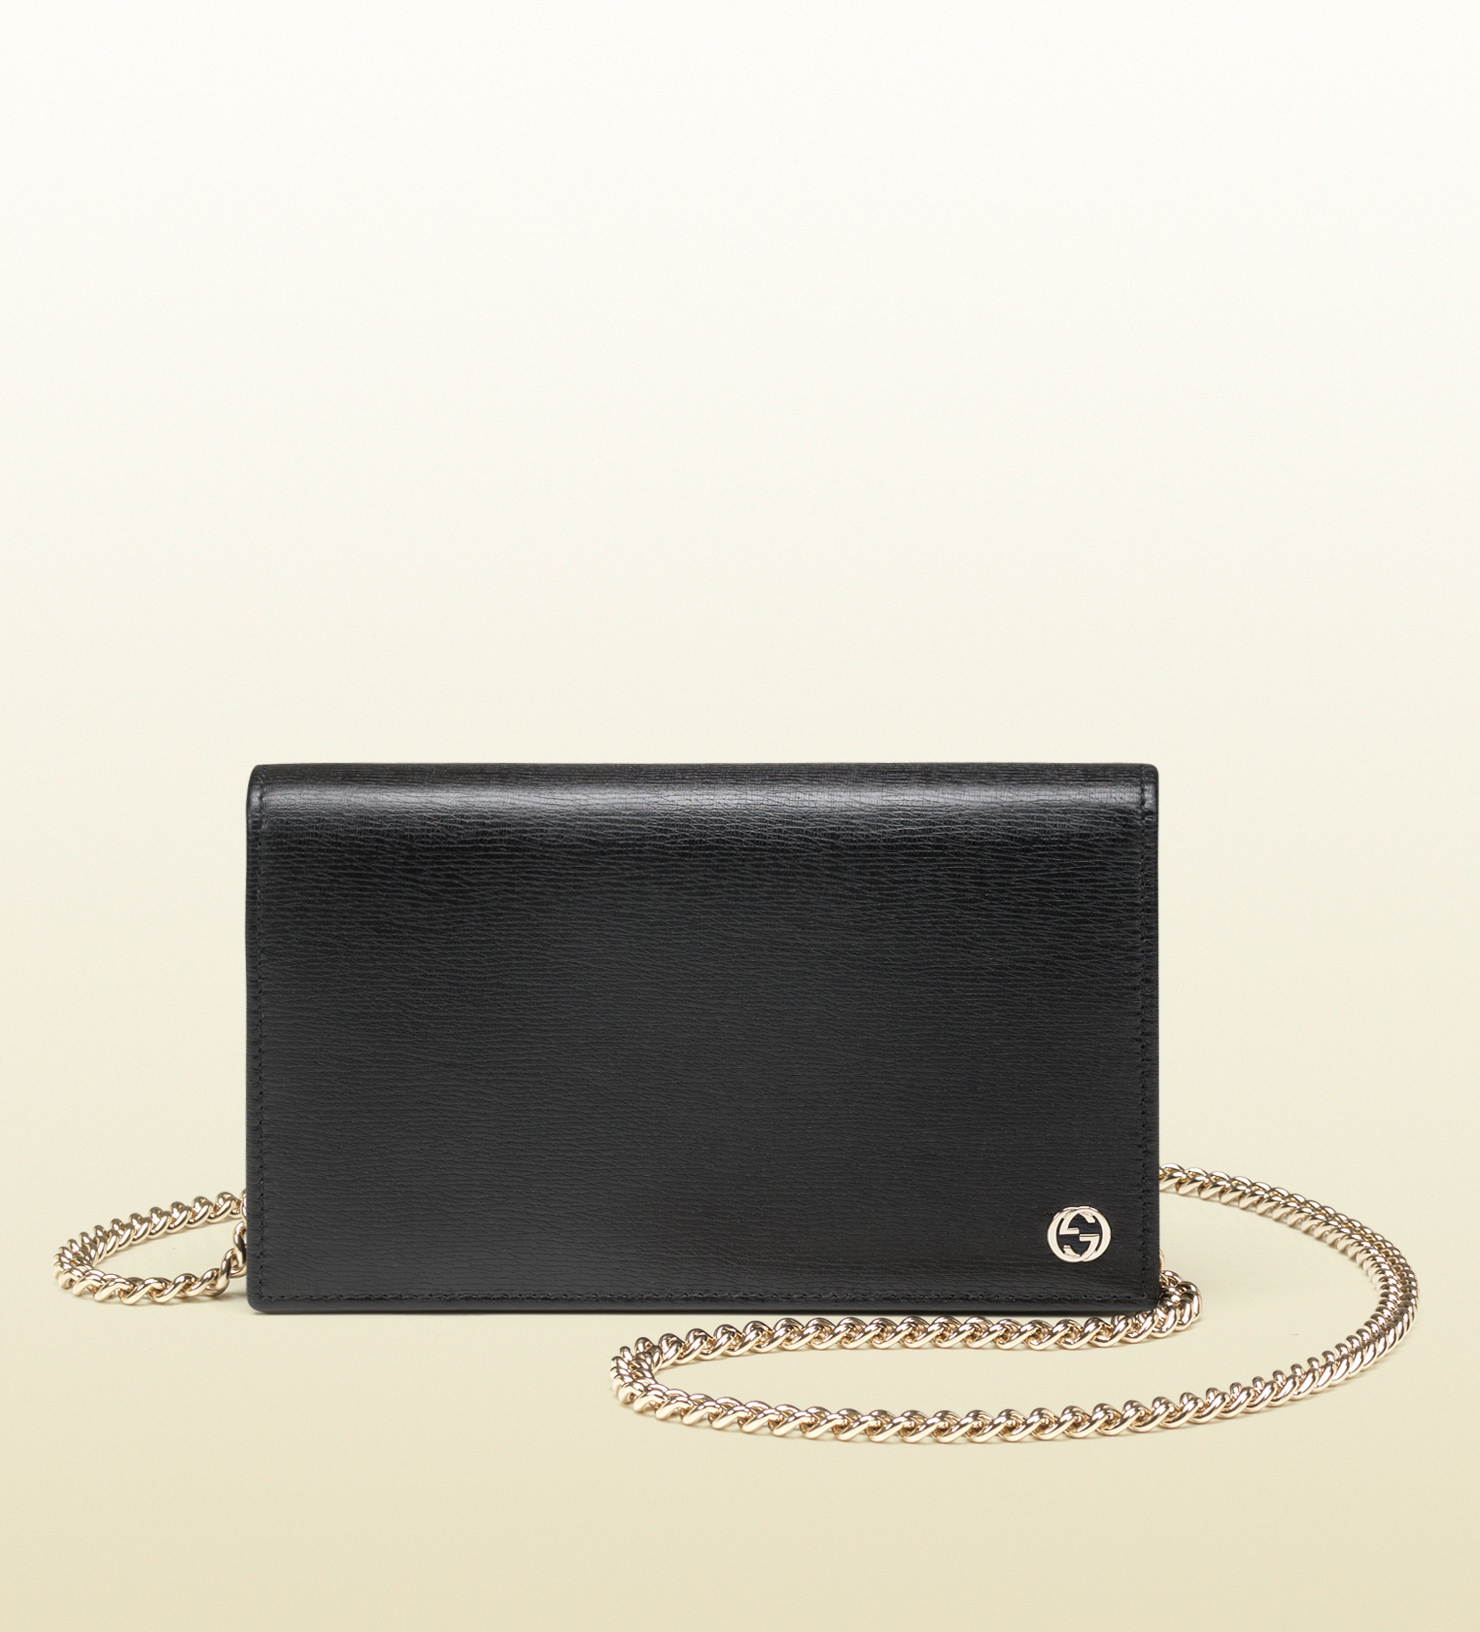 Lyst - Gucci Leather Chain Wallet in Black